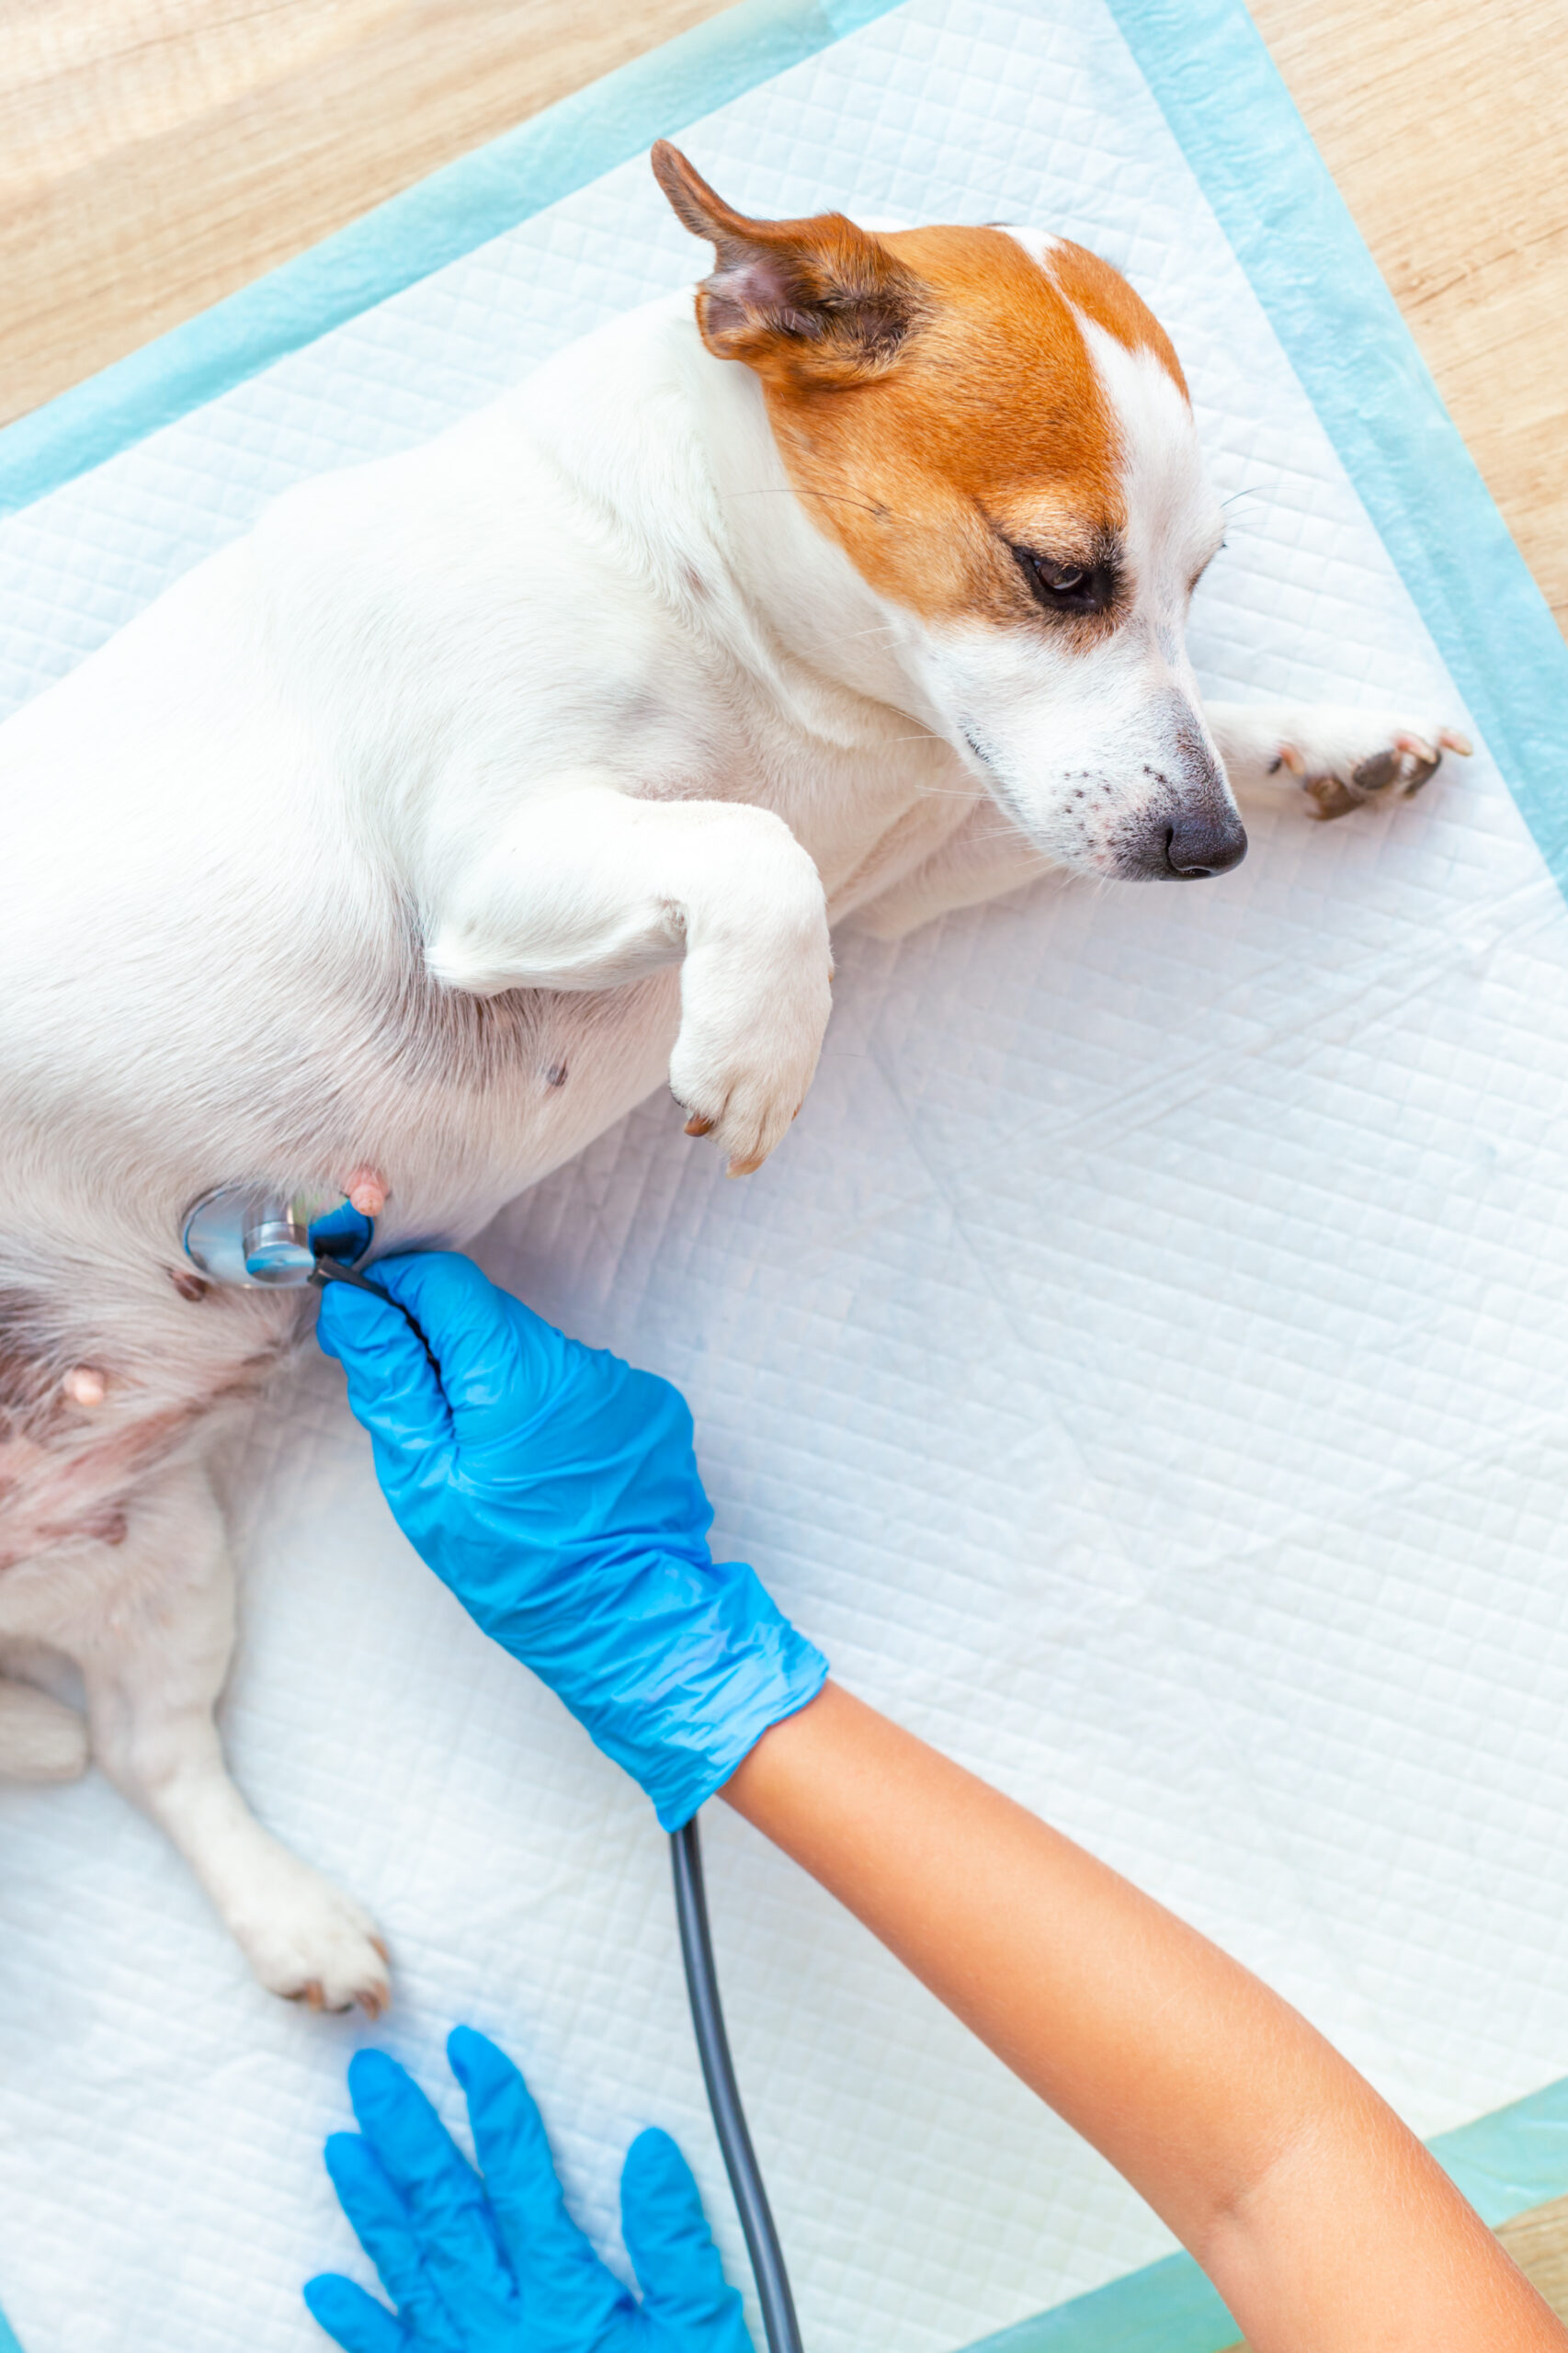 A vet doctor's hands in medical gloves examine a Jack Russell Terrier dog lying on a disposable diaper, listening for breath or heart with a stethoscope. Veterinary pet care. Close-up. Vertical.